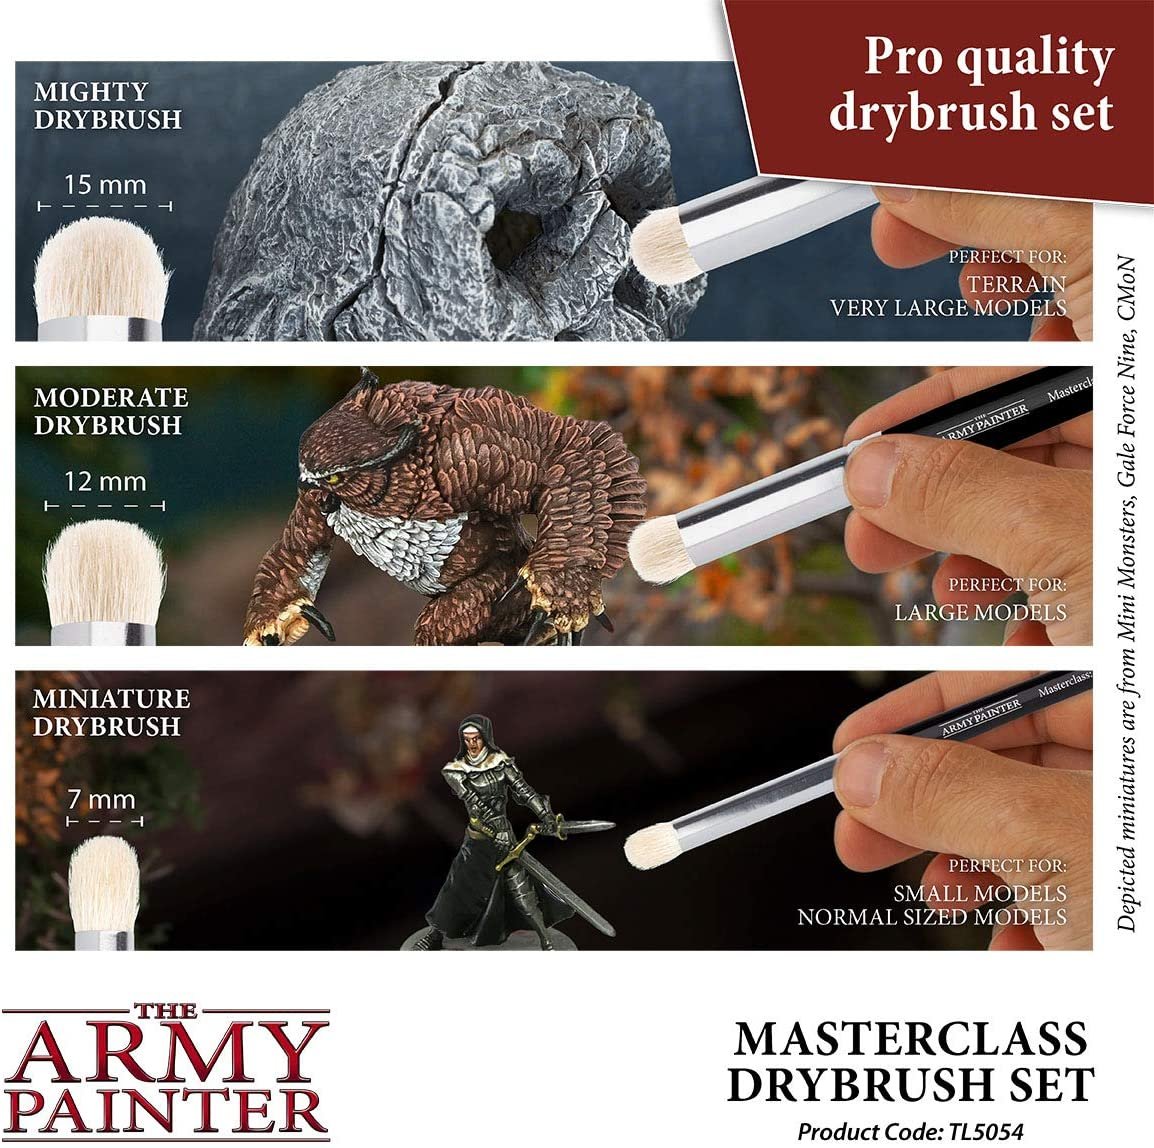 The Army Painter - Masterclass Drybrush Set – Wargames Delivered